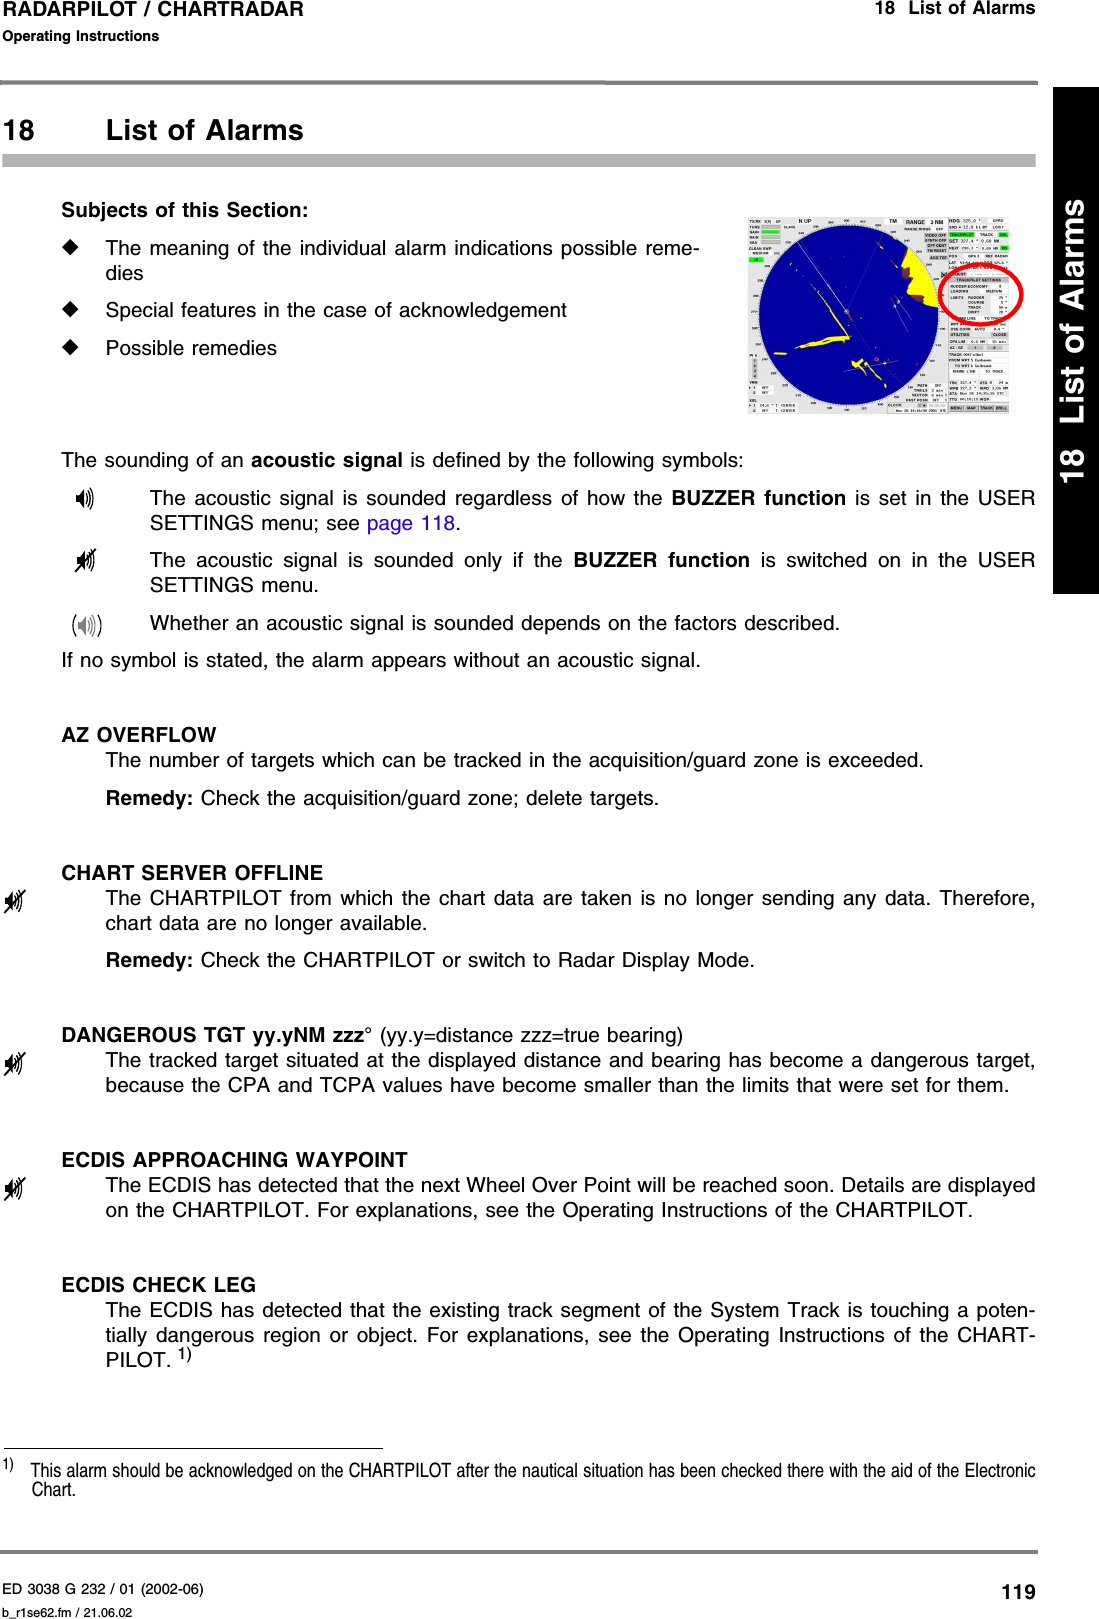 ED 3038 G 232 / 01 (2002-06) Operating Instructions18  List of Alarmsb_r1se62.fm / 21.06.02119RADARPILOT / CHARTRADAR18  List of Alarms18 List of AlarmsSubjects of this Section: ◆The meaning of the individual alarm indications possible reme-dies◆Special features in the case of acknowledgement◆Possible remediesThe sounding of an acoustic signal is defined by the following symbols:  The acoustic signal is sounded regardless of how the BUZZER function is set in the USERSETTINGS menu; see page 118.  The acoustic signal is sounded only if the BUZZER function is switched on in the USERSETTINGS menu.Whether an acoustic signal is sounded depends on the factors described.If no symbol is stated, the alarm appears without an acoustic signal.AZ OVERFLOW The number of targets which can be tracked in the acquisition/guard zone is exceeded.Remedy: Check the acquisition/guard zone; delete targets.CHART SERVER OFFLINEThe CHARTPILOT from which the chart data are taken is no longer sending any data. Therefore,chart data are no longer available.Remedy: Check the CHARTPILOT or switch to Radar Display Mode.DANGEROUS TGT yy.yNM zzz° (yy.y=distance zzz=true bearing)The tracked target situated at the displayed distance and bearing has become a dangerous target,because the CPA and TCPA values have become smaller than the limits that were set for them.ECDIS APPROACHING WAYPOINTThe ECDIS has detected that the next Wheel Over Point will be reached soon. Details are displayedon the CHARTPILOT. For explanations, see the Operating Instructions of the CHARTPILOT.ECDIS CHECK LEGThe ECDIS has detected that the existing track segment of the System Track is touching a poten-tially dangerous region or object. For explanations, see the Operating Instructions of the CHART-PILOT. 1)1)  This alarm should be acknowledged on the CHARTPILOT after the nautical situation has been checked there with the aid of the ElectronicChart.